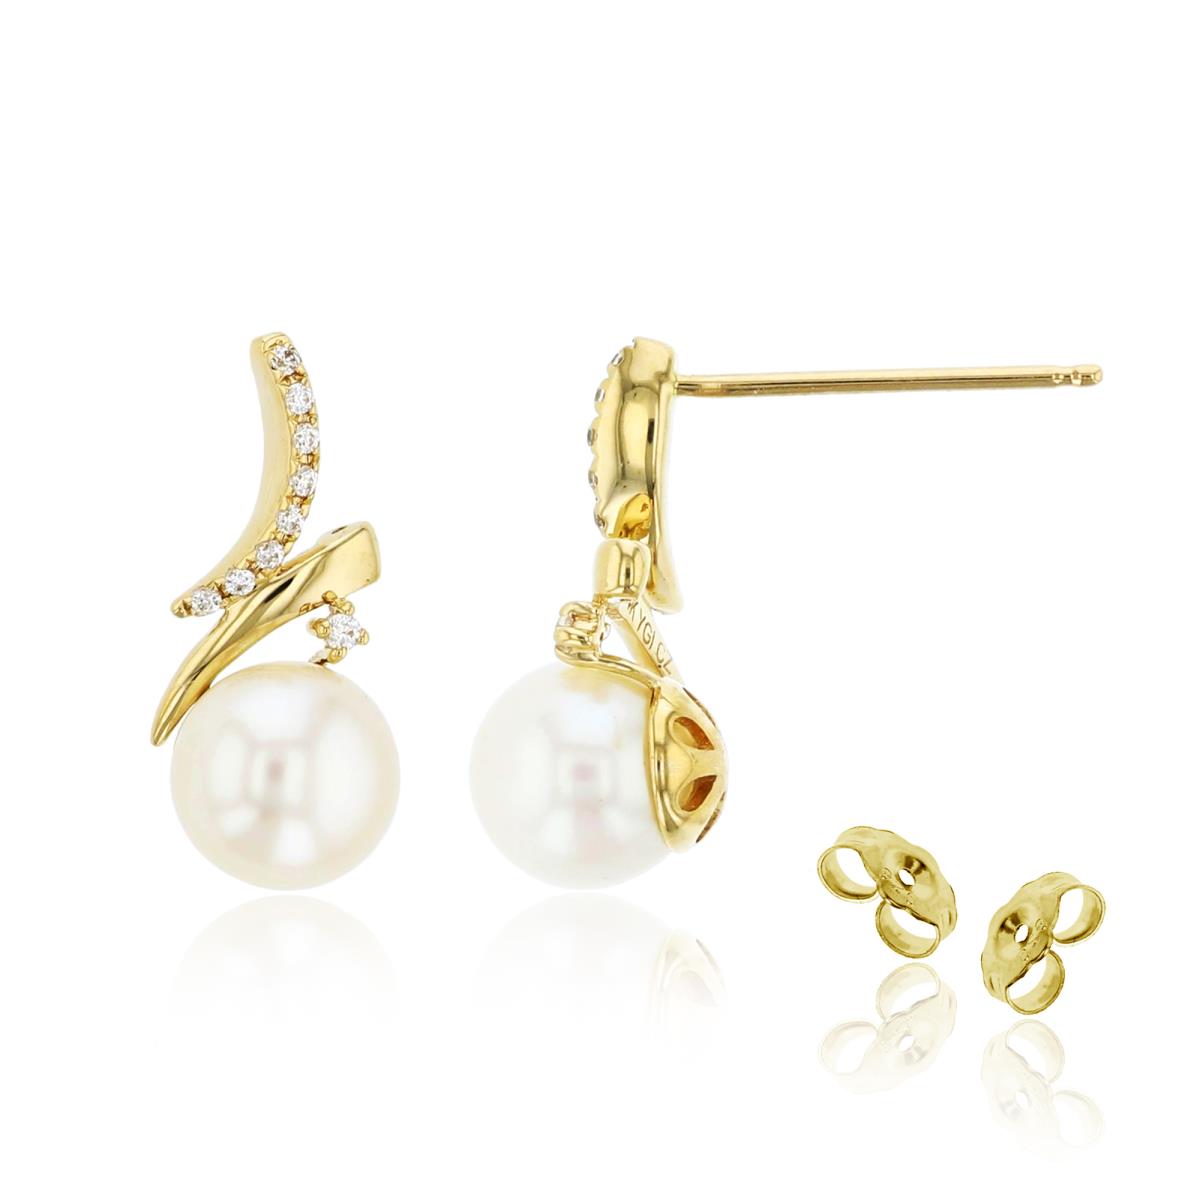 10K Yellow Gold 0.04 CTTW Rnd Diamonds & 6mm Rnd White Pearl Earring with Clutch